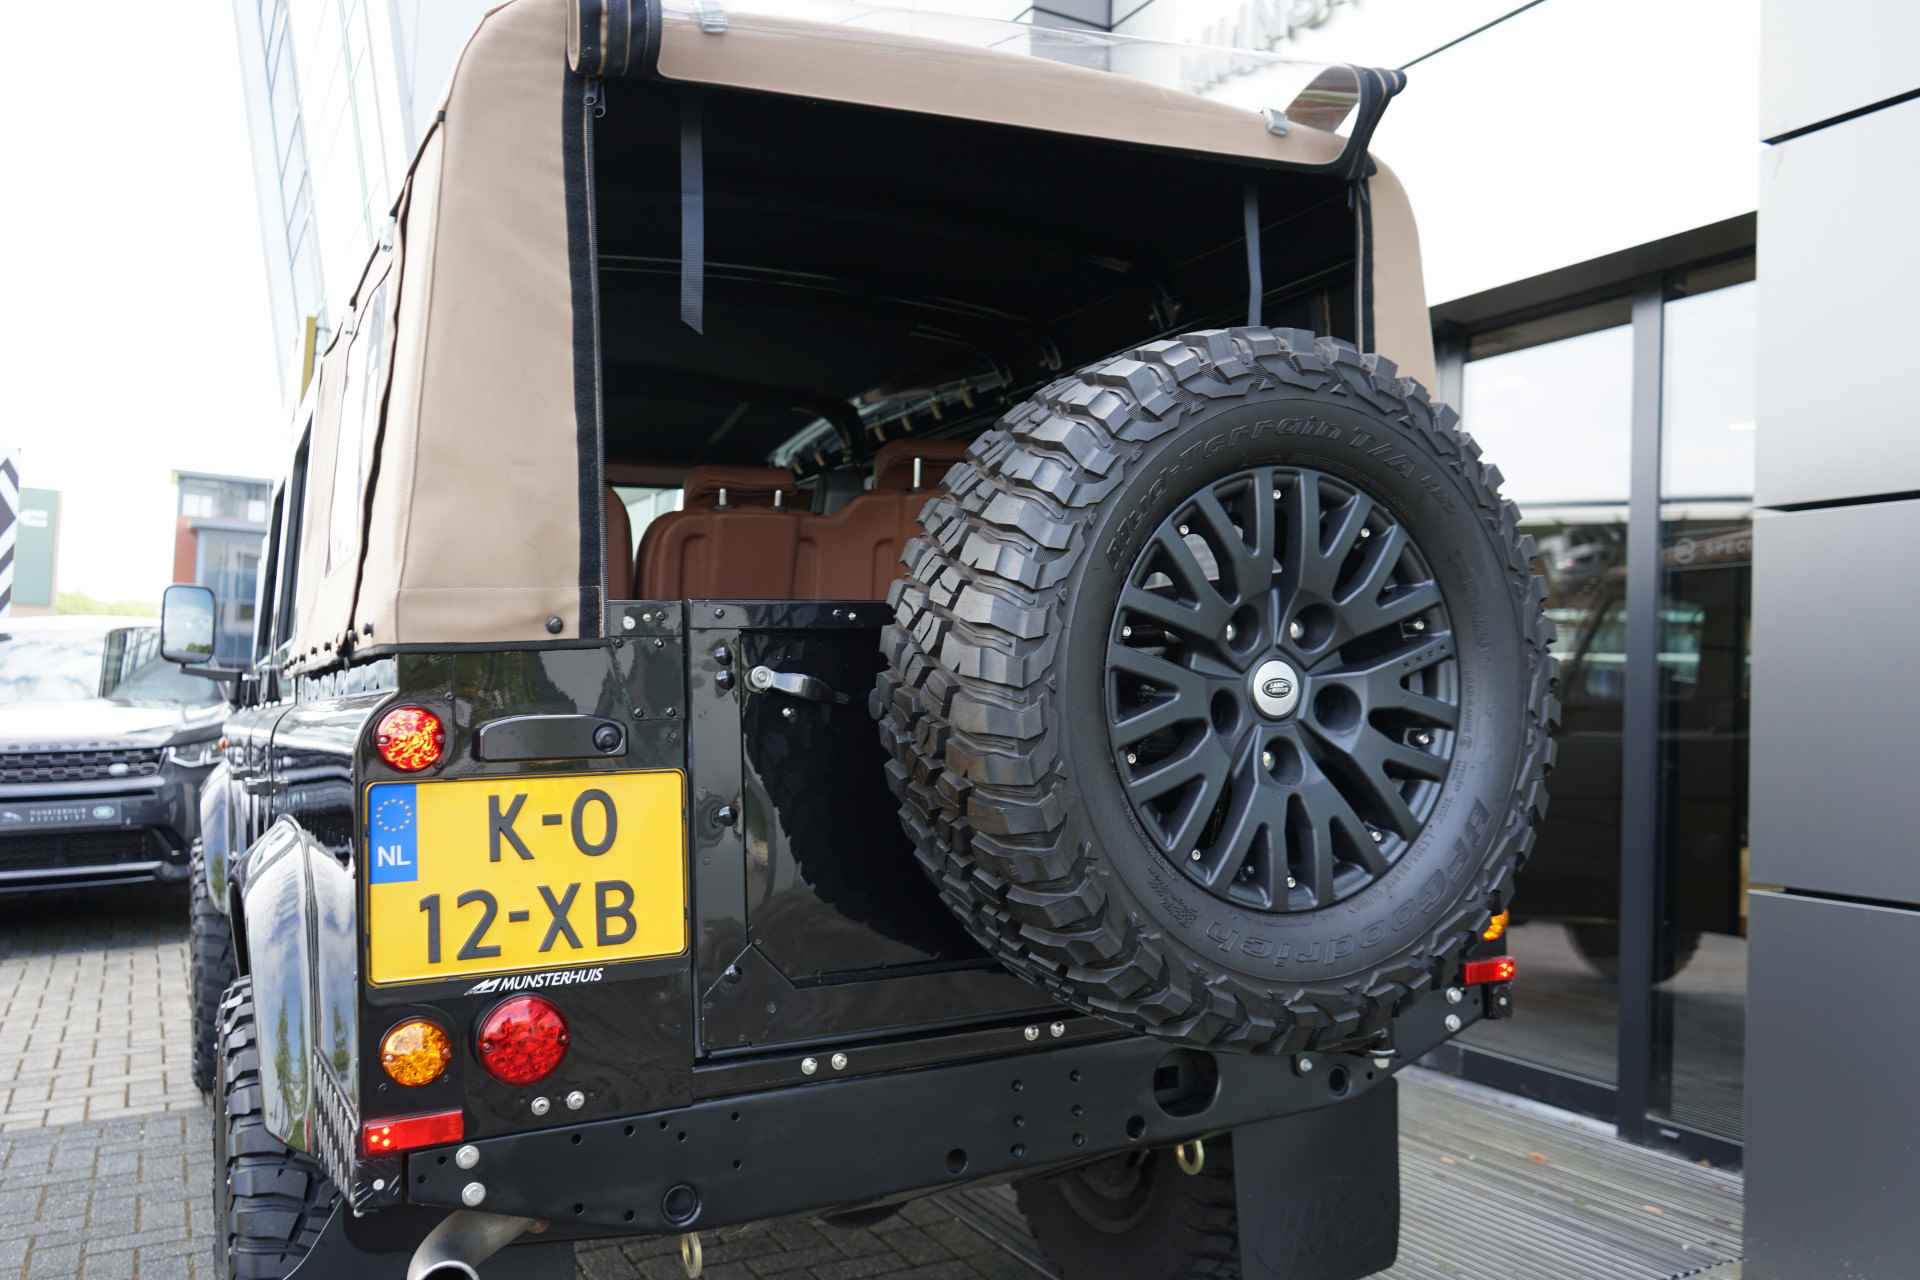 Land Rover Defender 2.4 TD 110 SW Convertible Brand New - River House Rebuild, Butterscotch Leather, BF Goodridge Tyres - 23/26